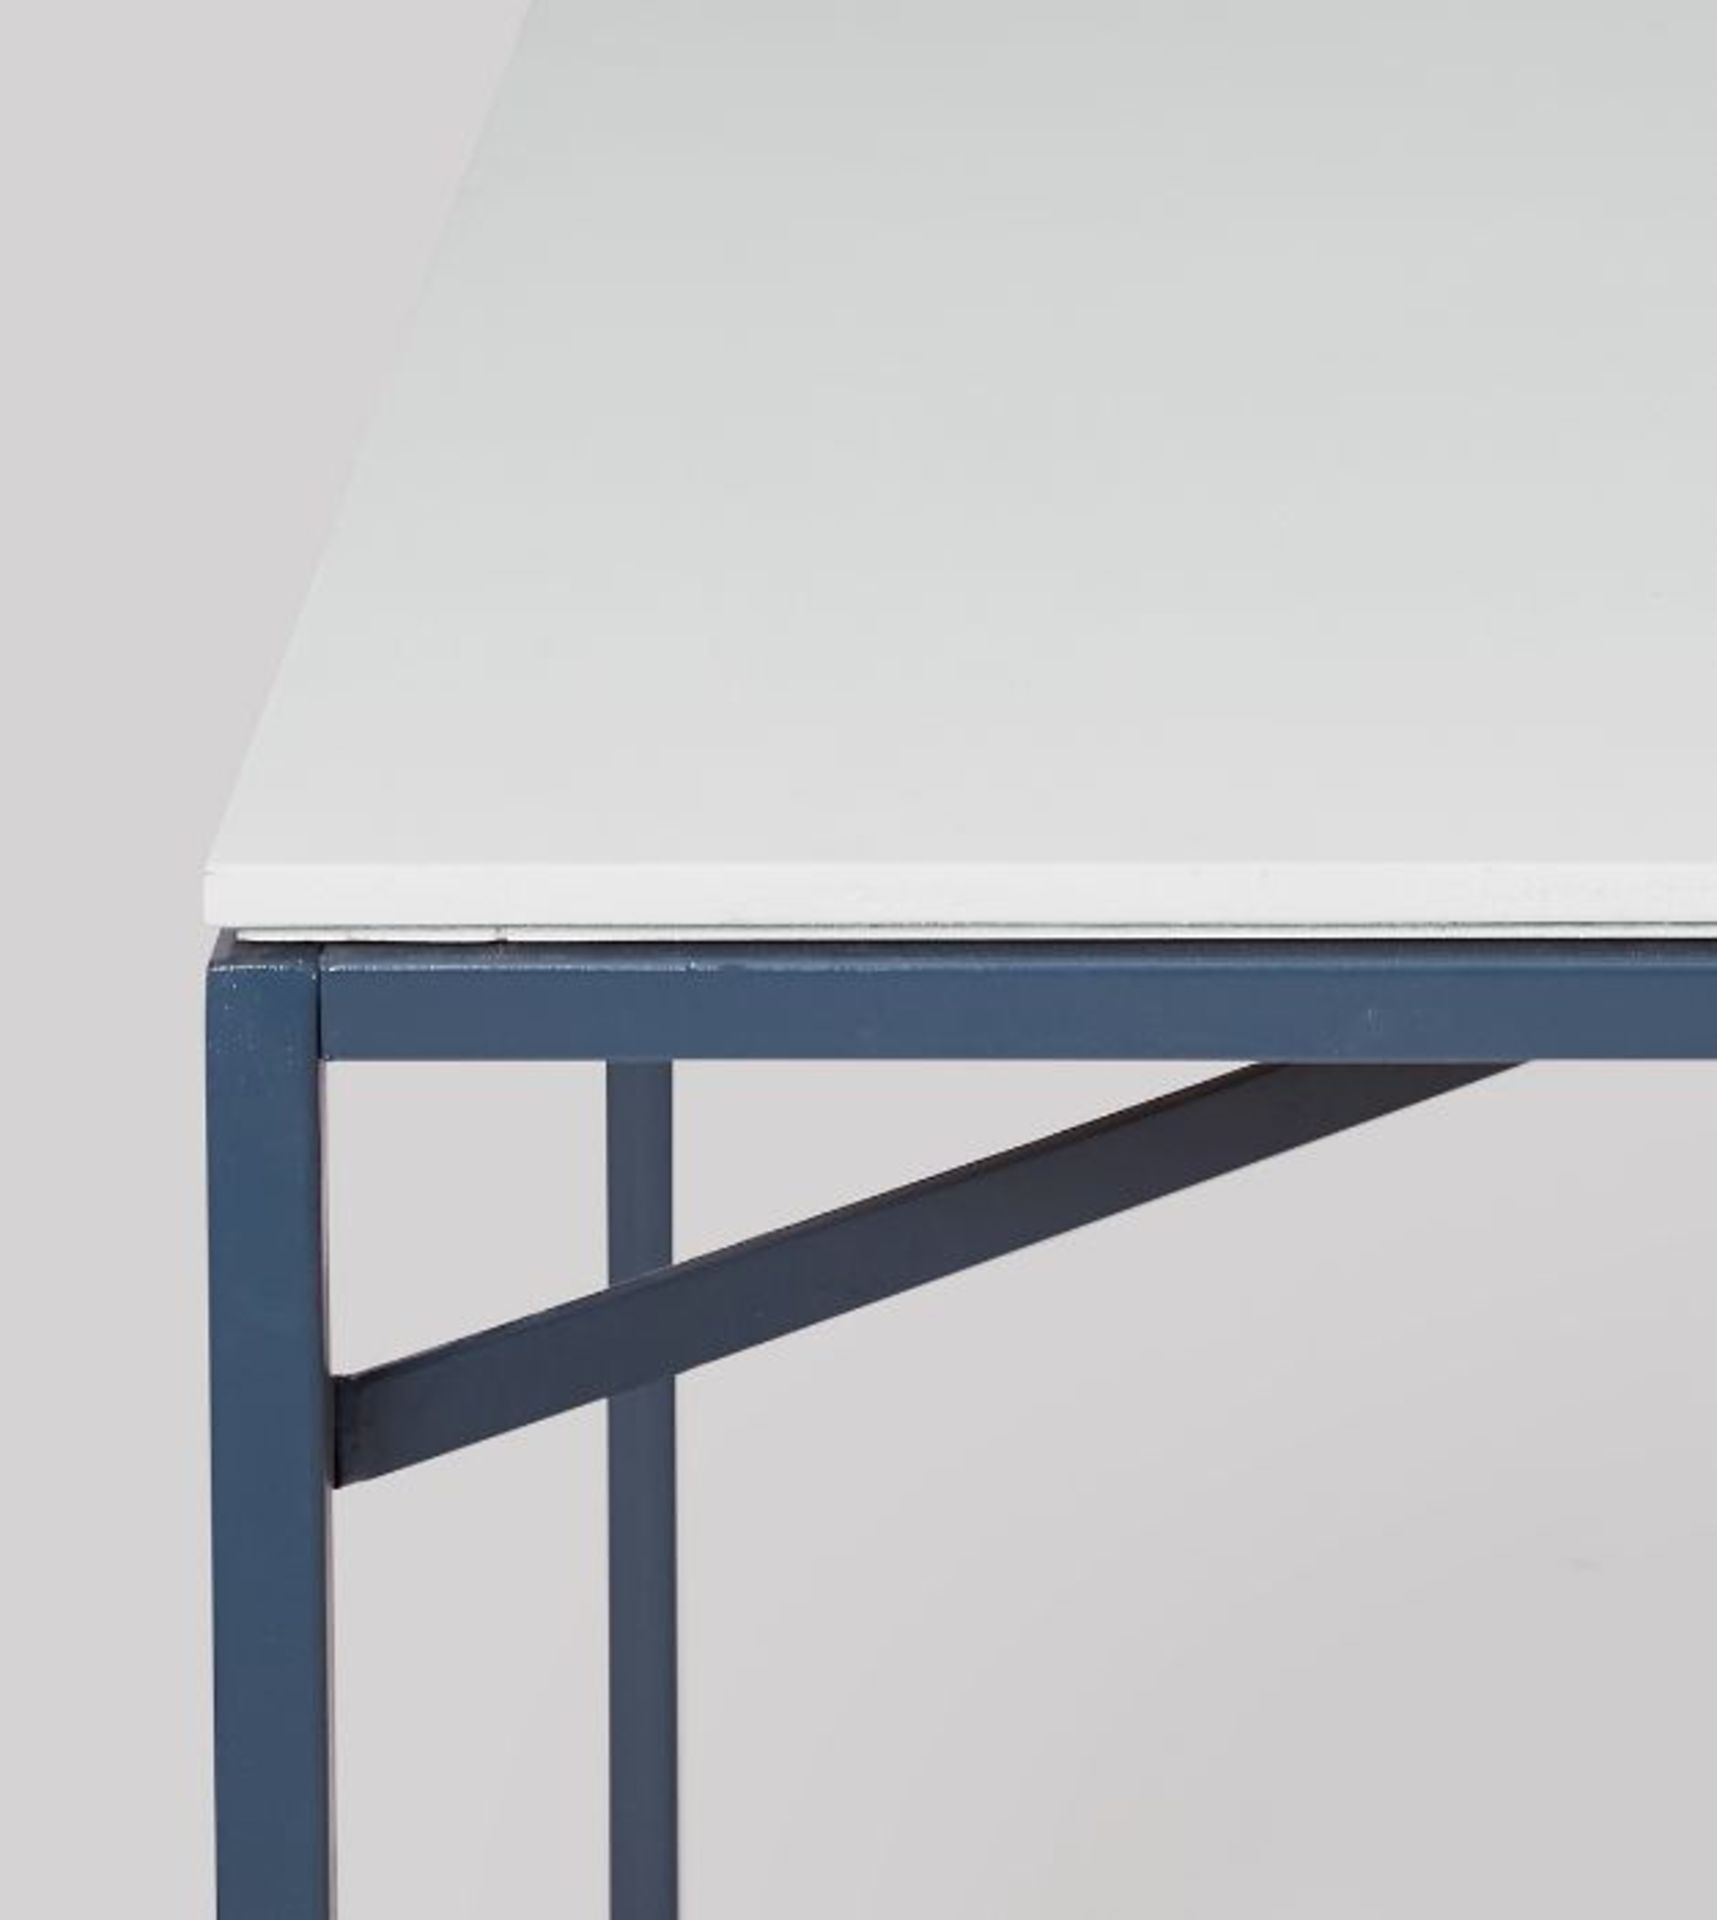 Swoon Docklands Dining Square Dining Table Navy and White RRP 199.00 Grade B - Image 2 of 3